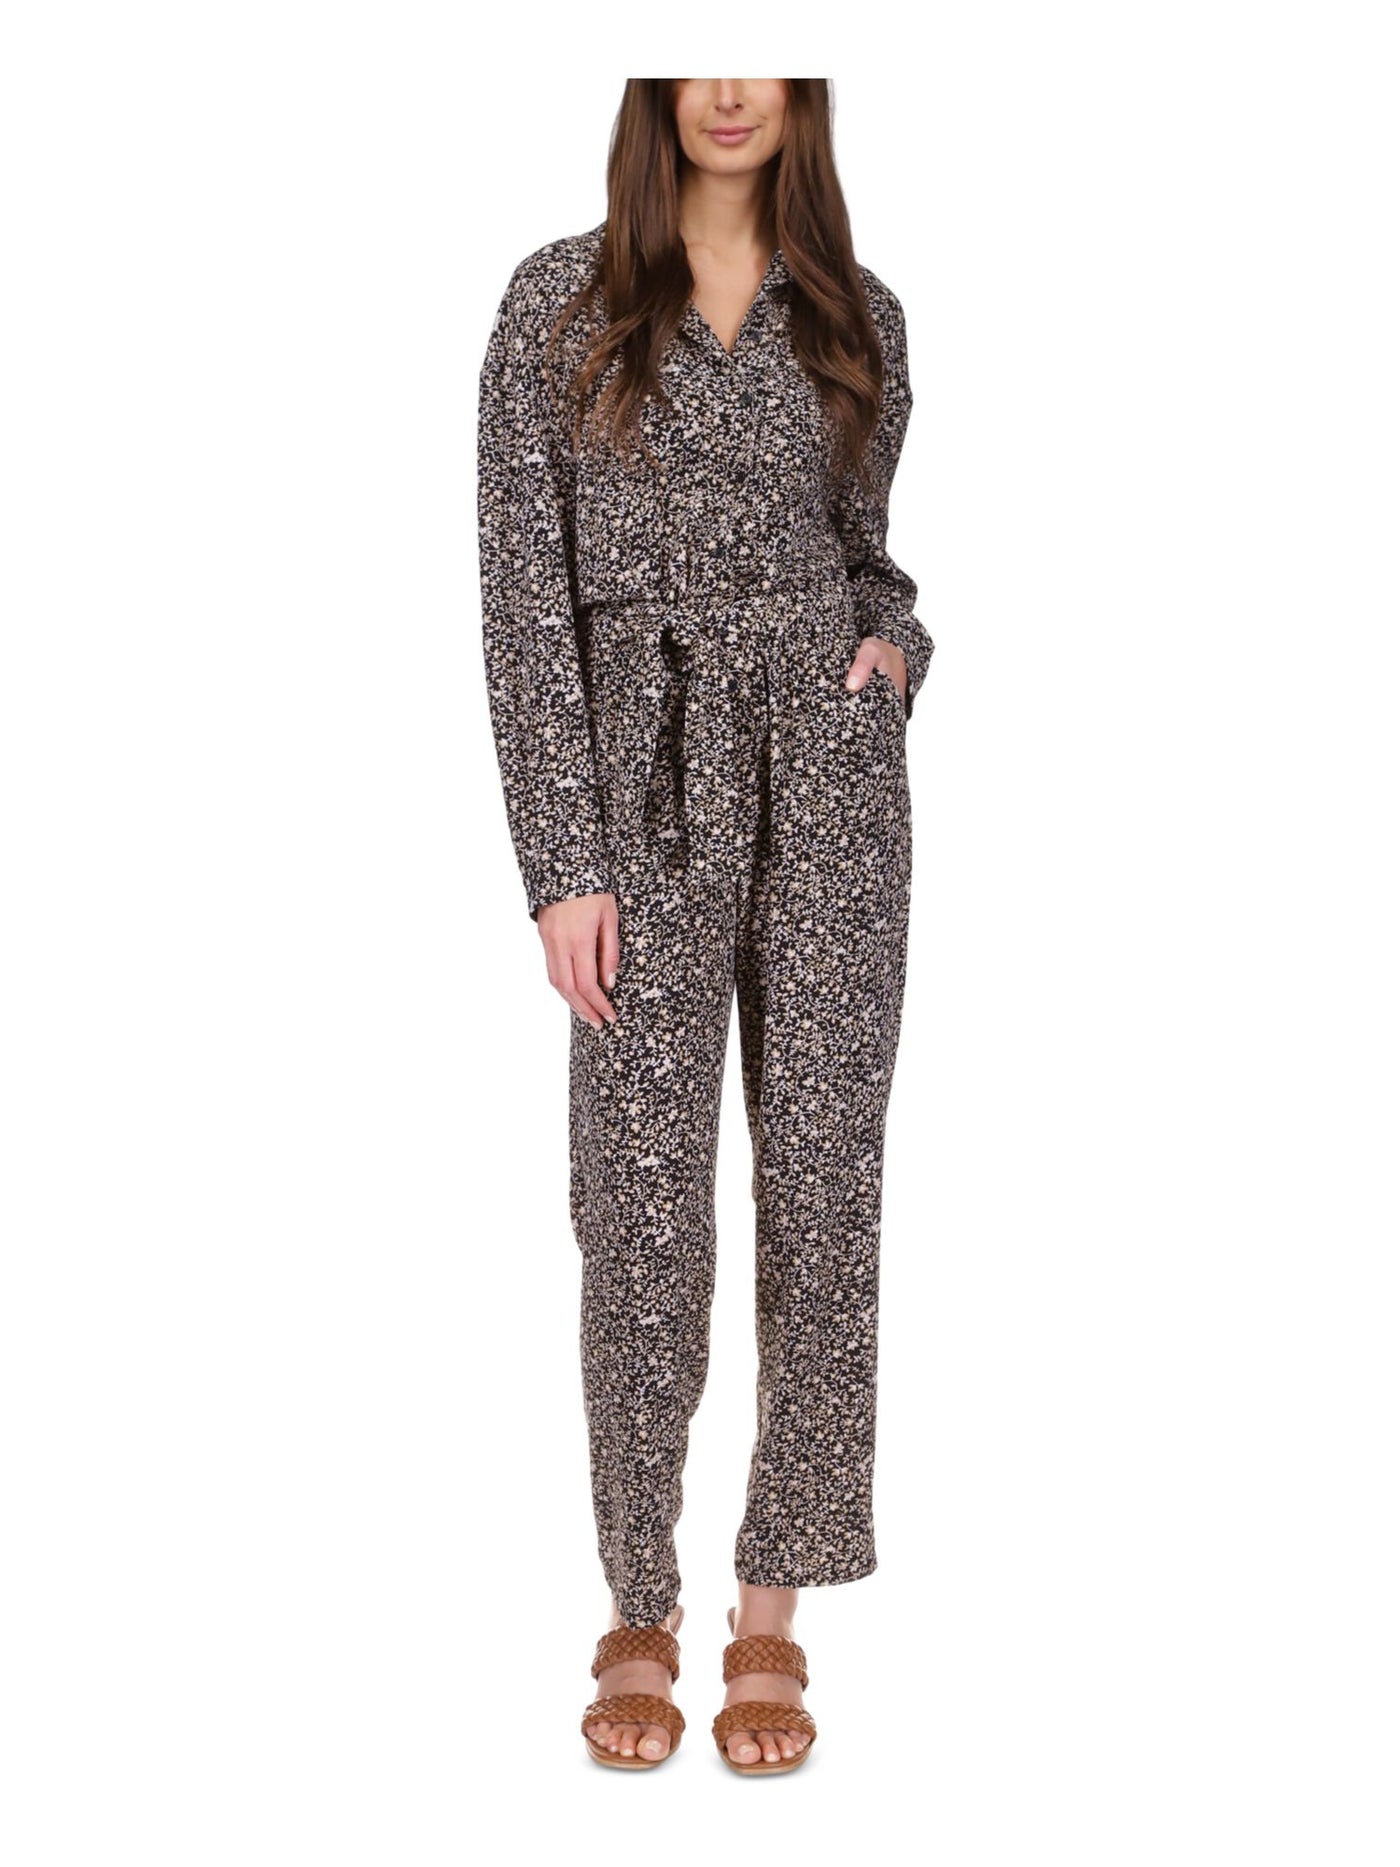 MICHAEL KORS Womens Black Lace Textured Tie Belt Pocketed Printed Long Sleeve Button Up Straight leg Jumpsuit XXL